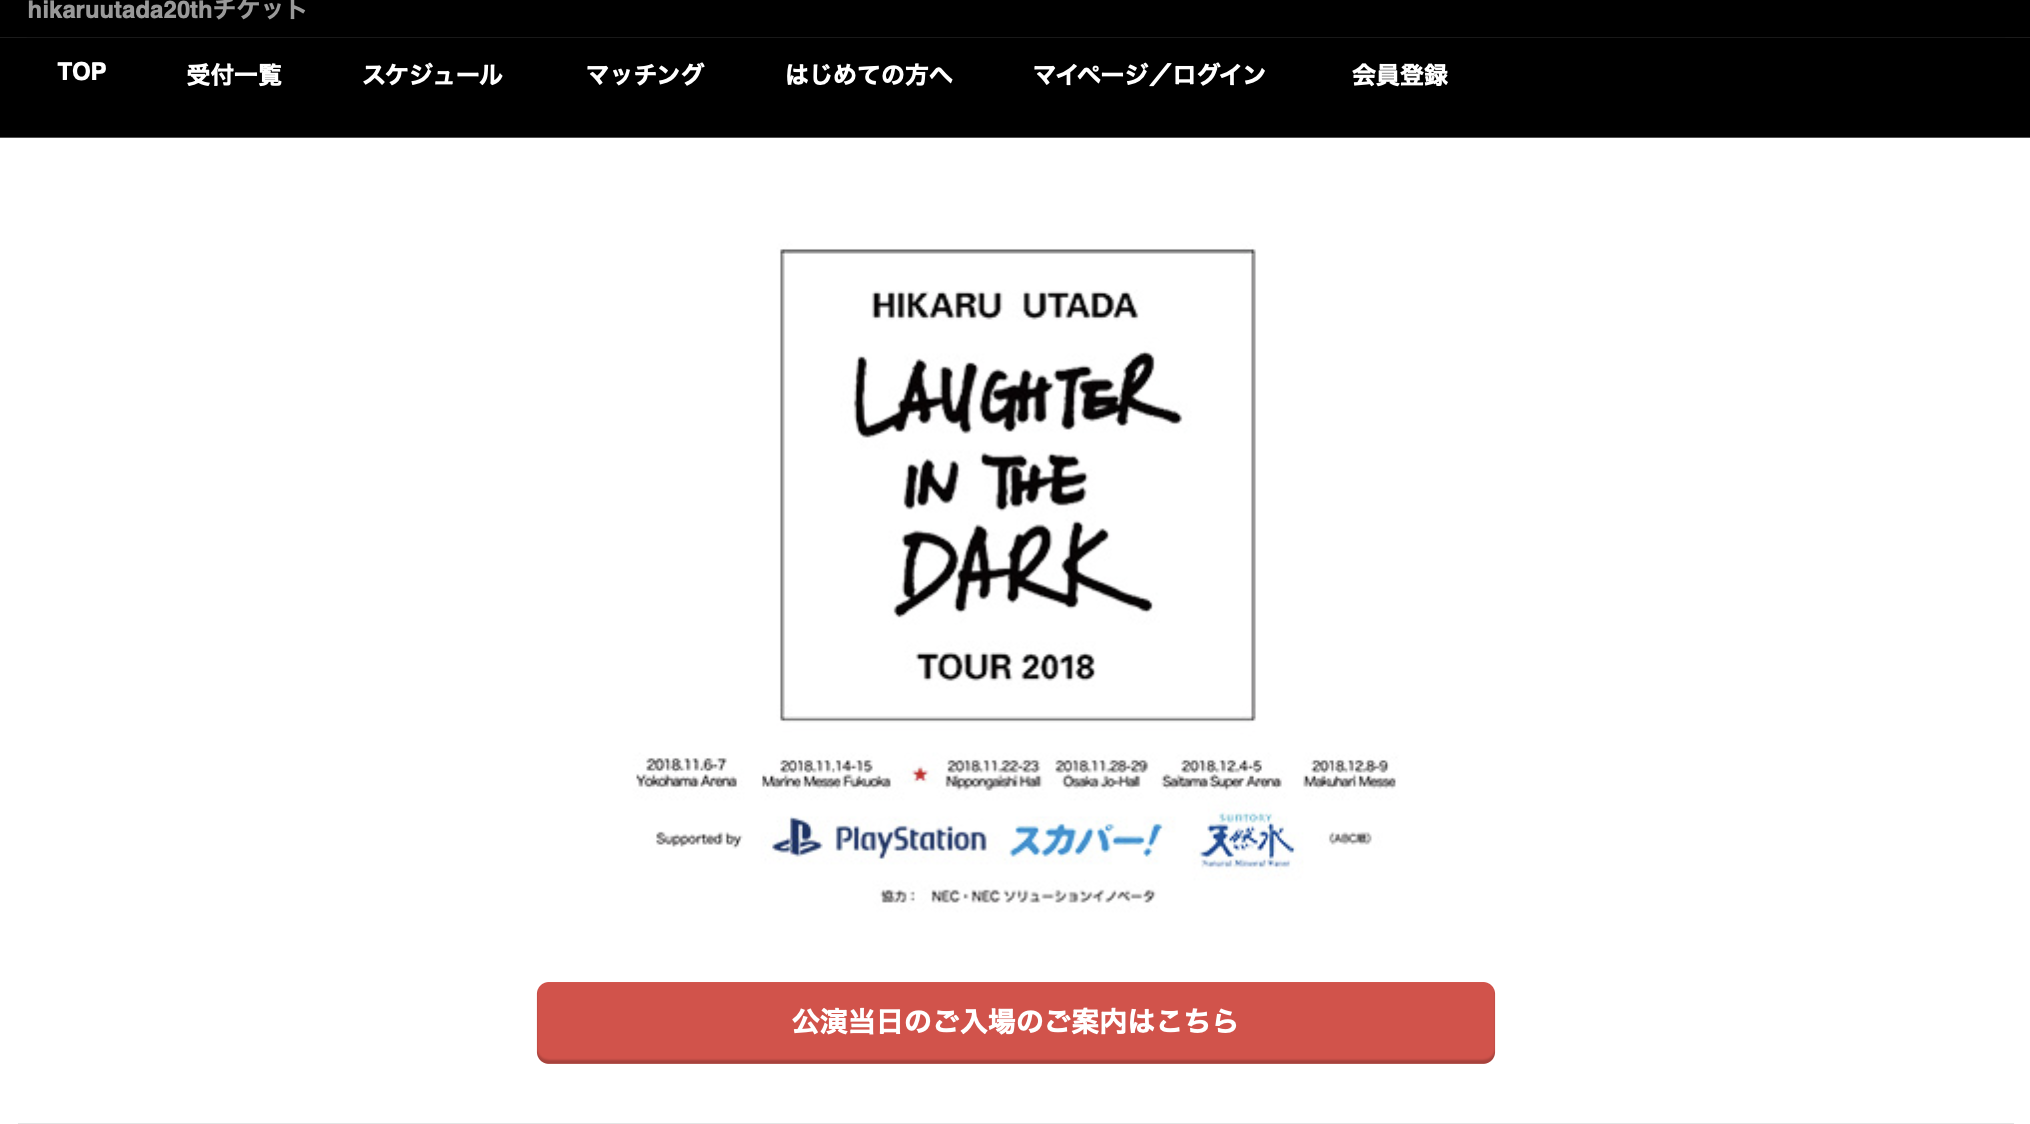 Laughter in the Dark Tour 2018